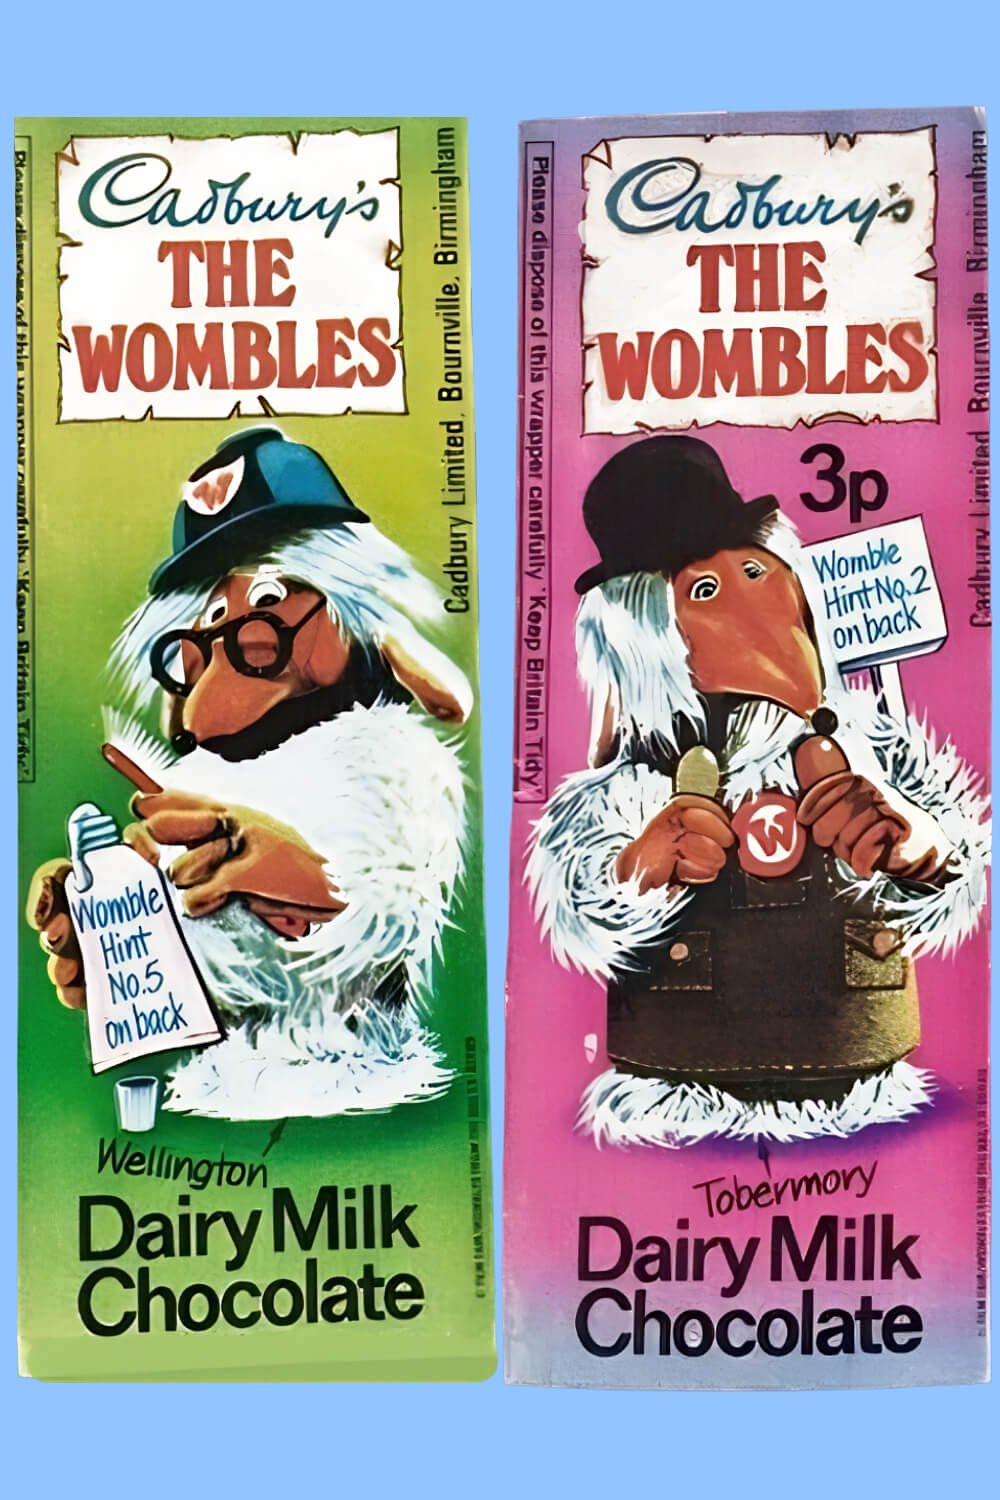 Two Cadbury's The Wombles Milk Chocolate Bars featuring Wellington (green wrapper) and Tobermory (pink wrapper)